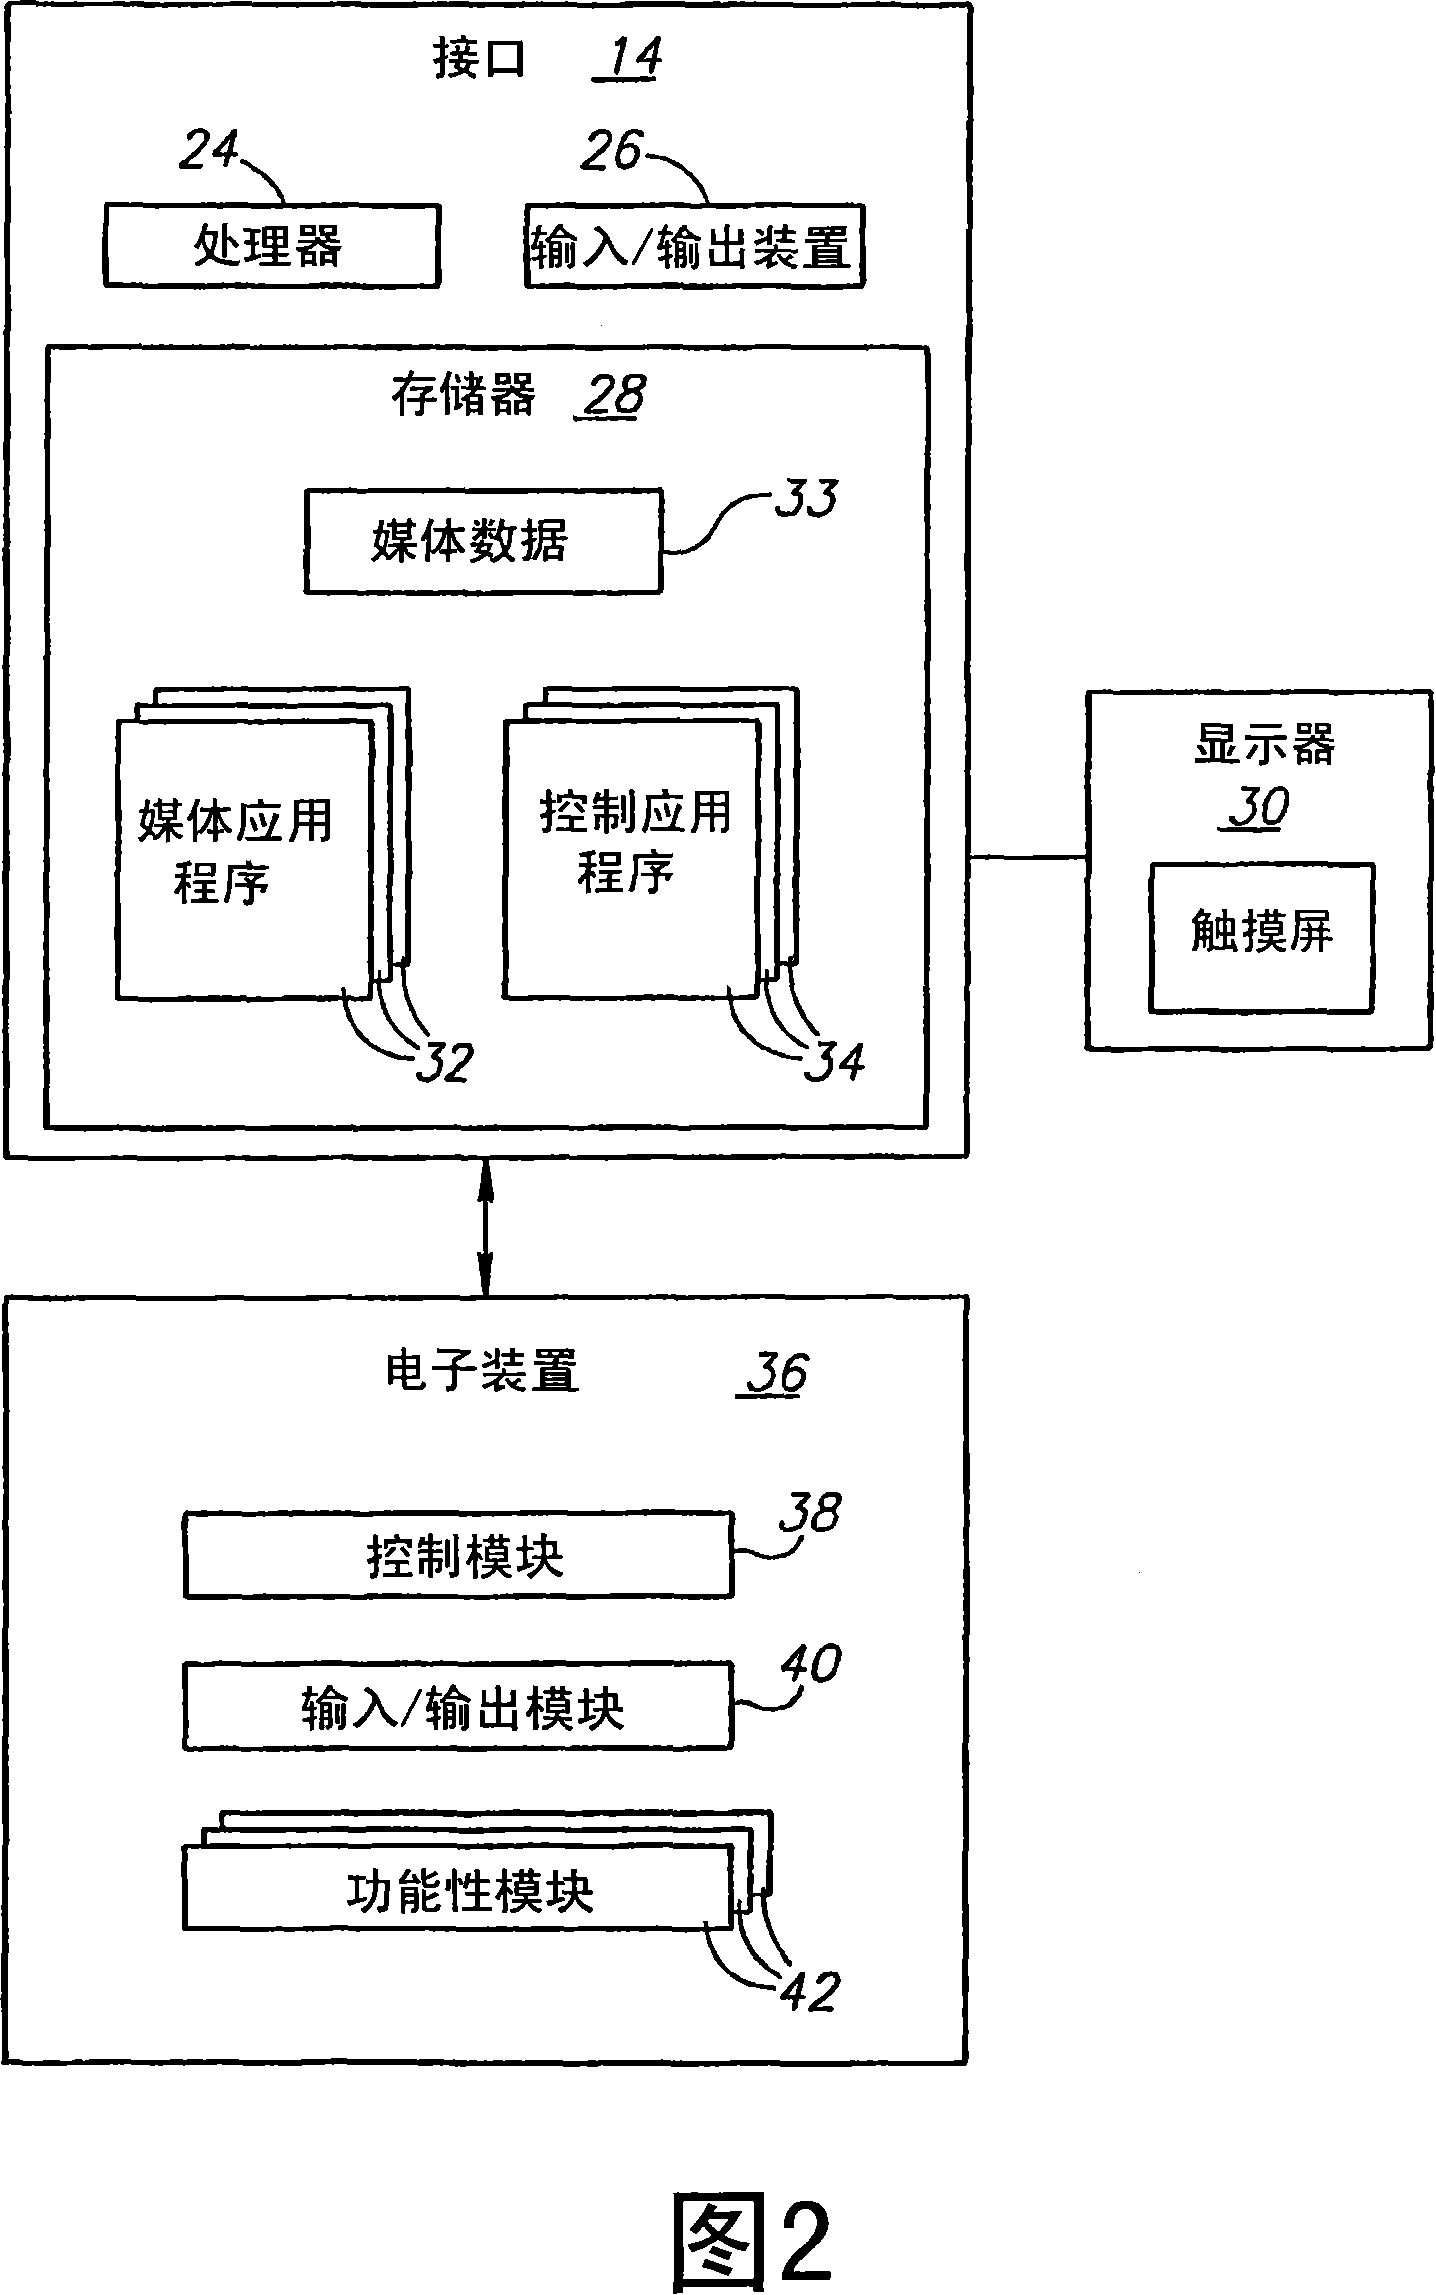 User interface for electronic devices